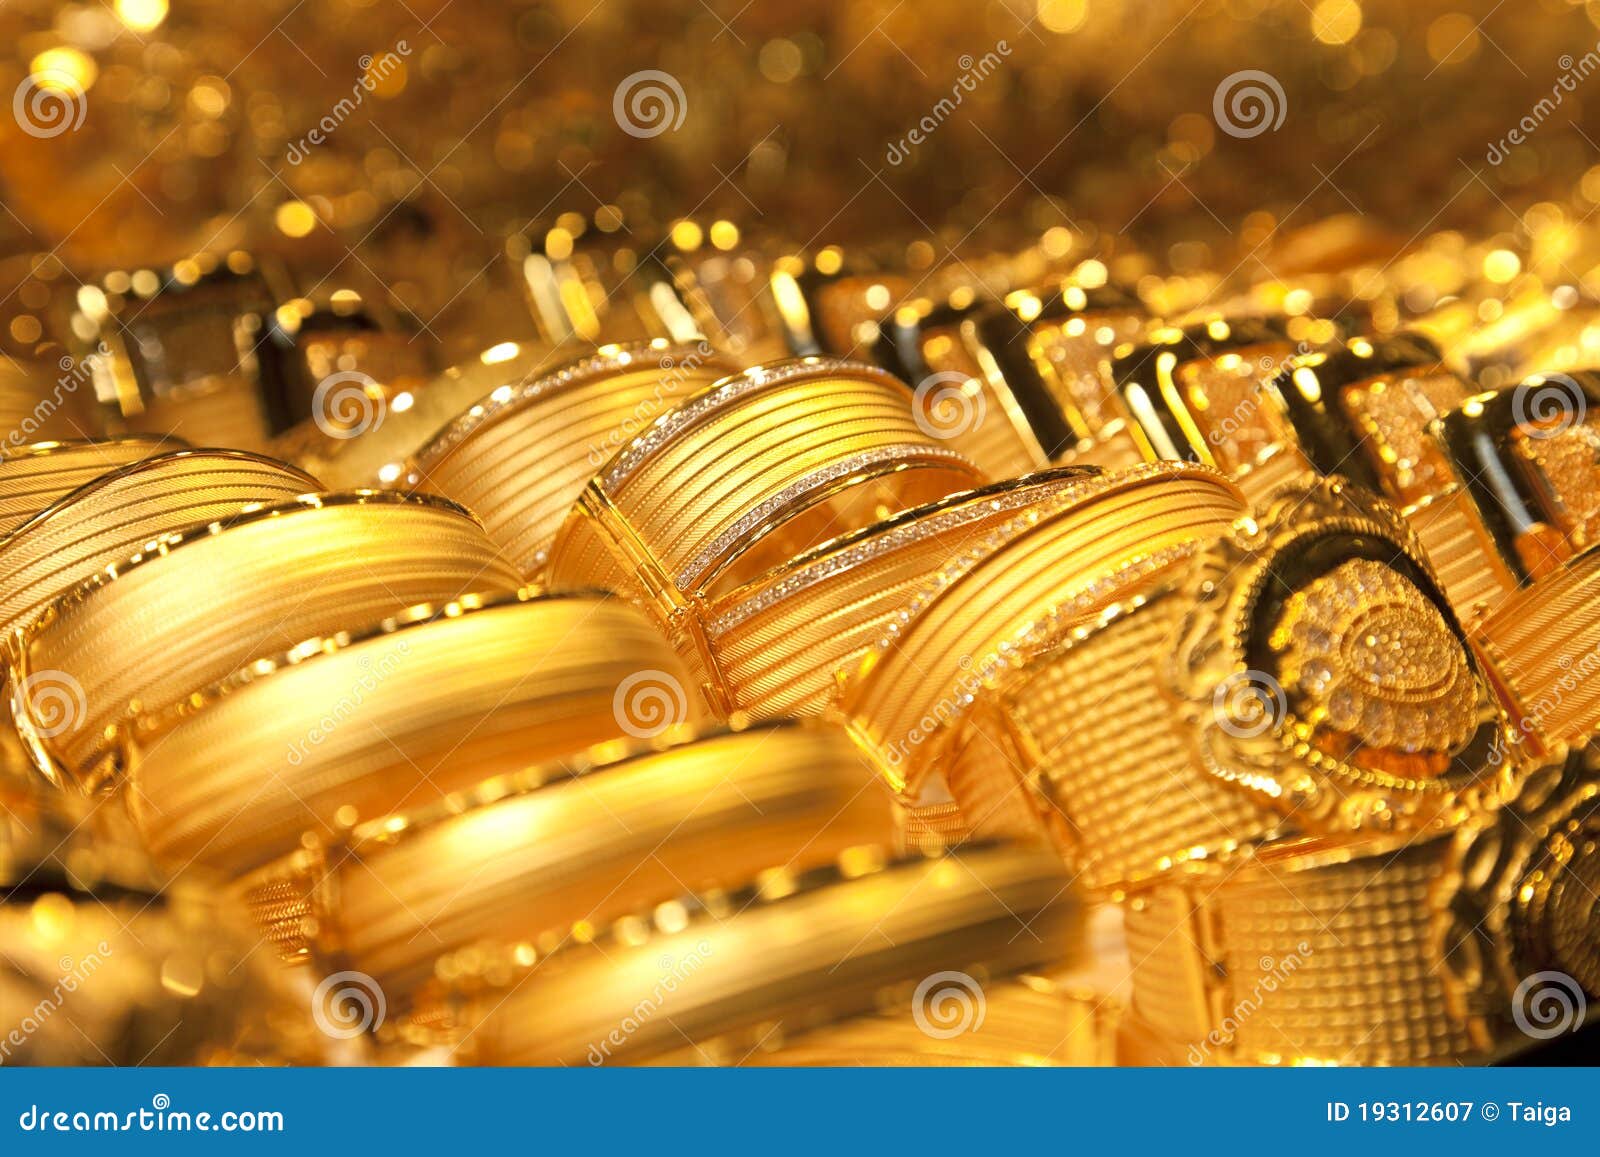 Gold Jewellery Photos Download Free Gold Jewellery Stock Photos  HD Images